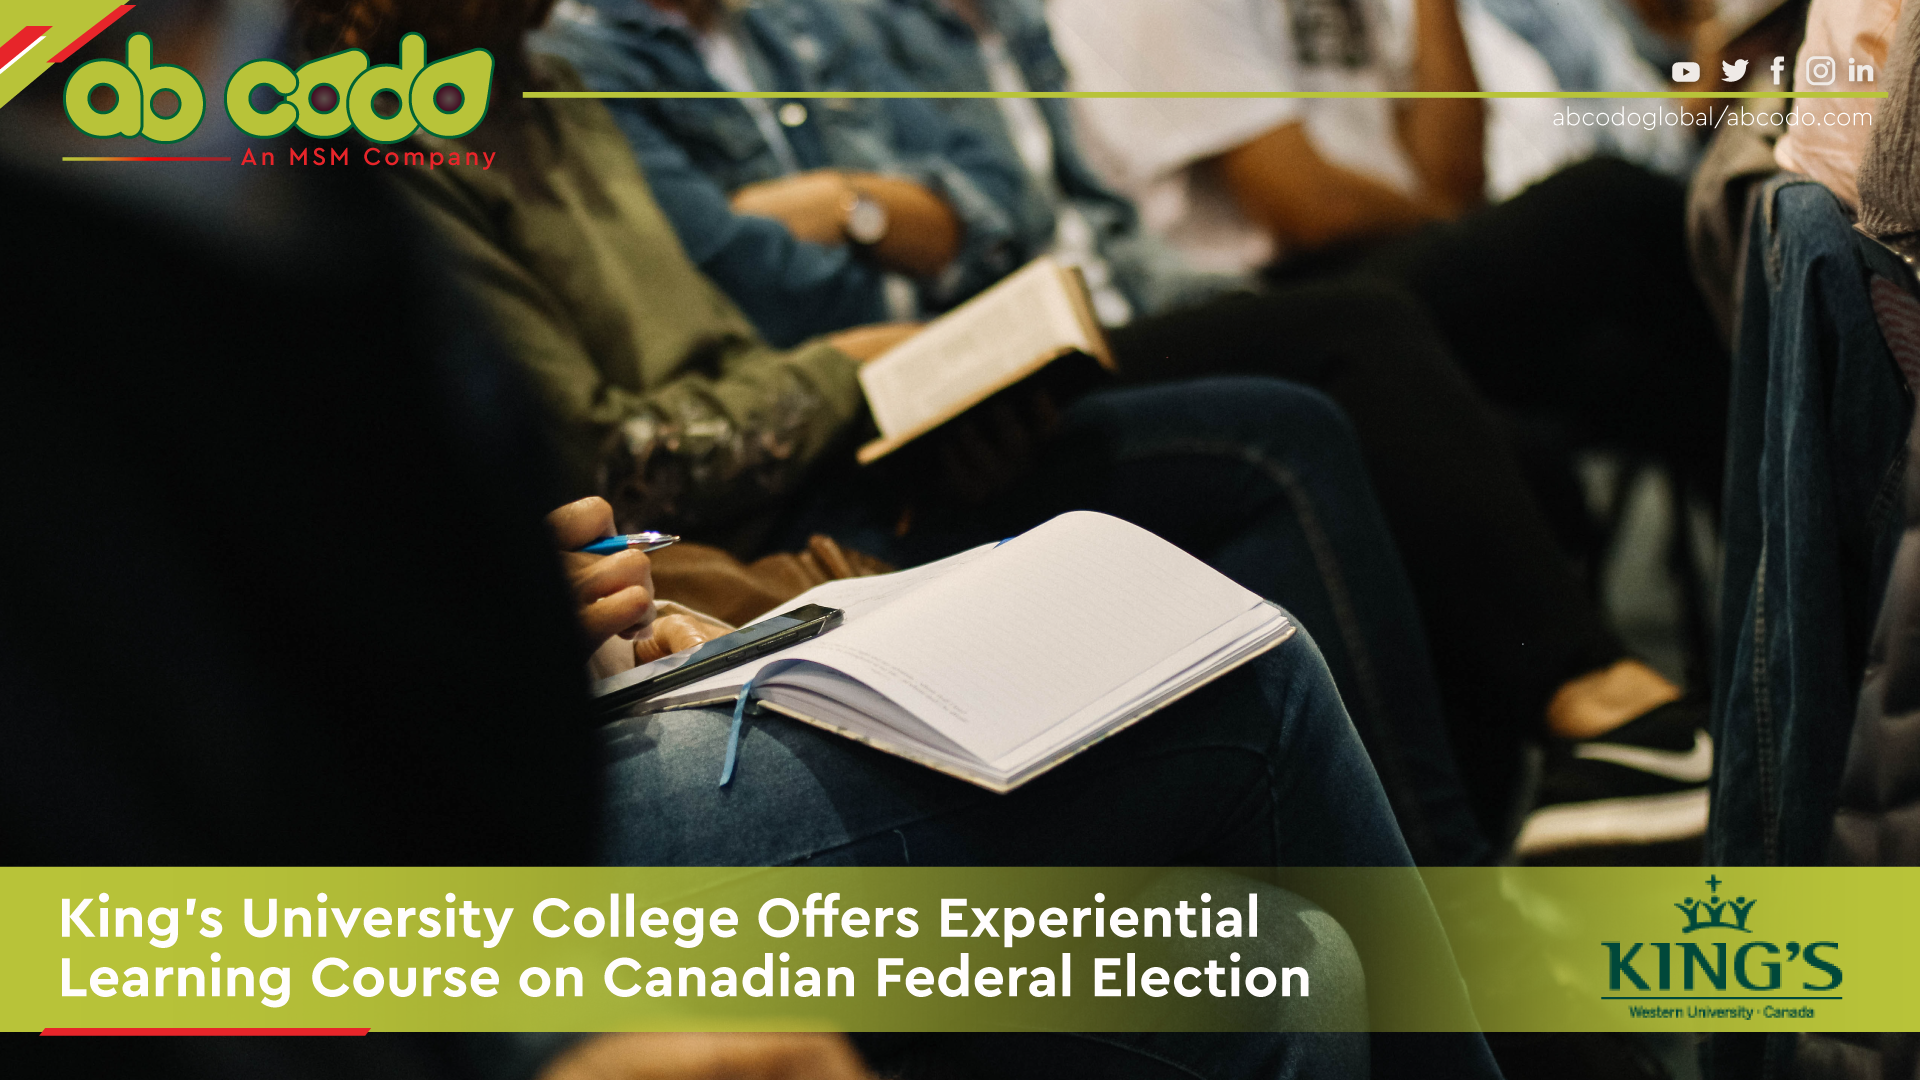 King’s University College Offers Experiential Learning Course on Canadian Federal Election